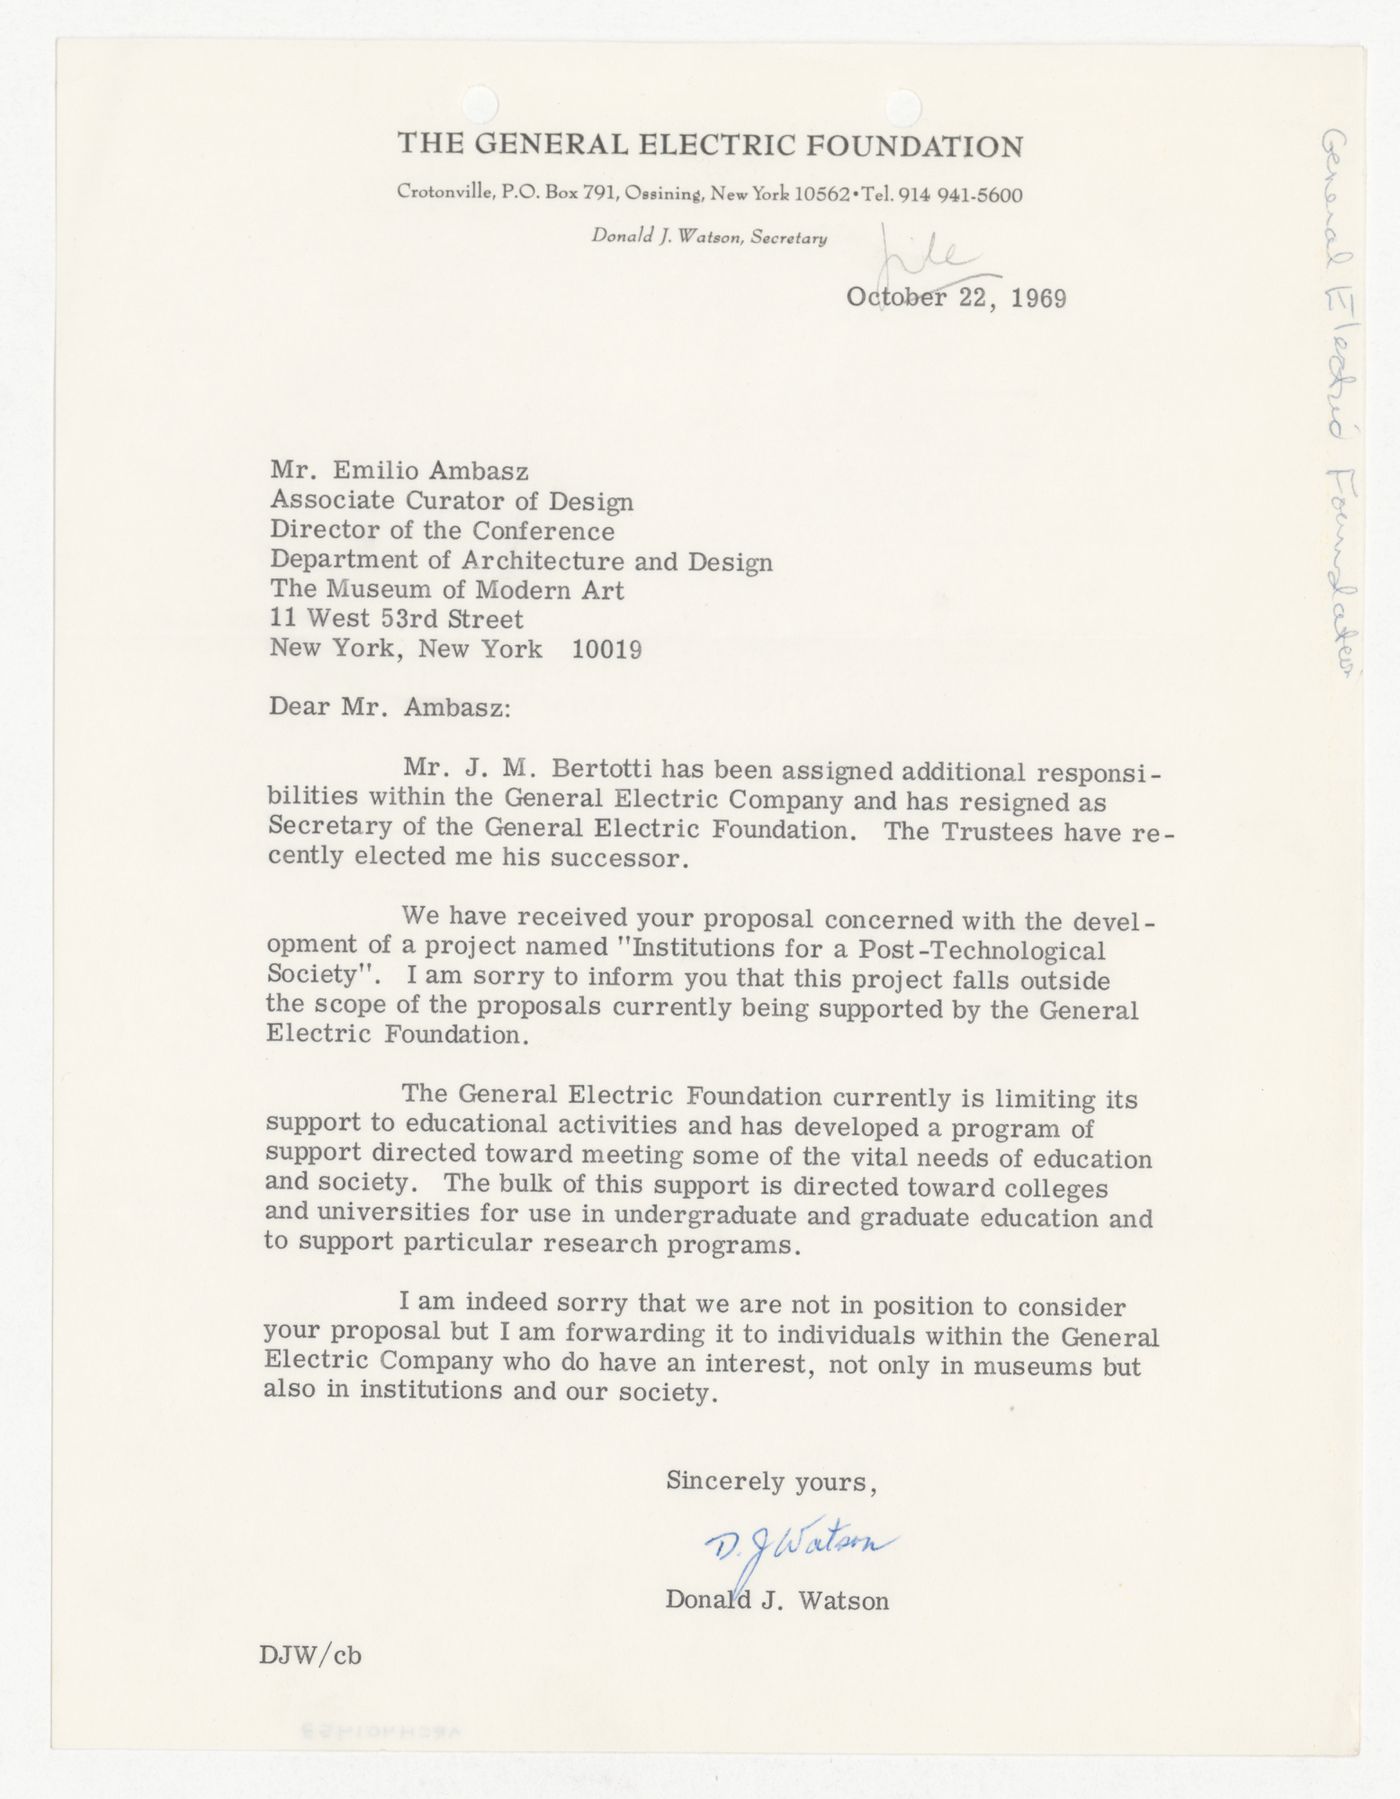 Letter from Donald J. Watson to Emilio Ambasz responding to proposal for Institutions for a Post-Technological Society conference